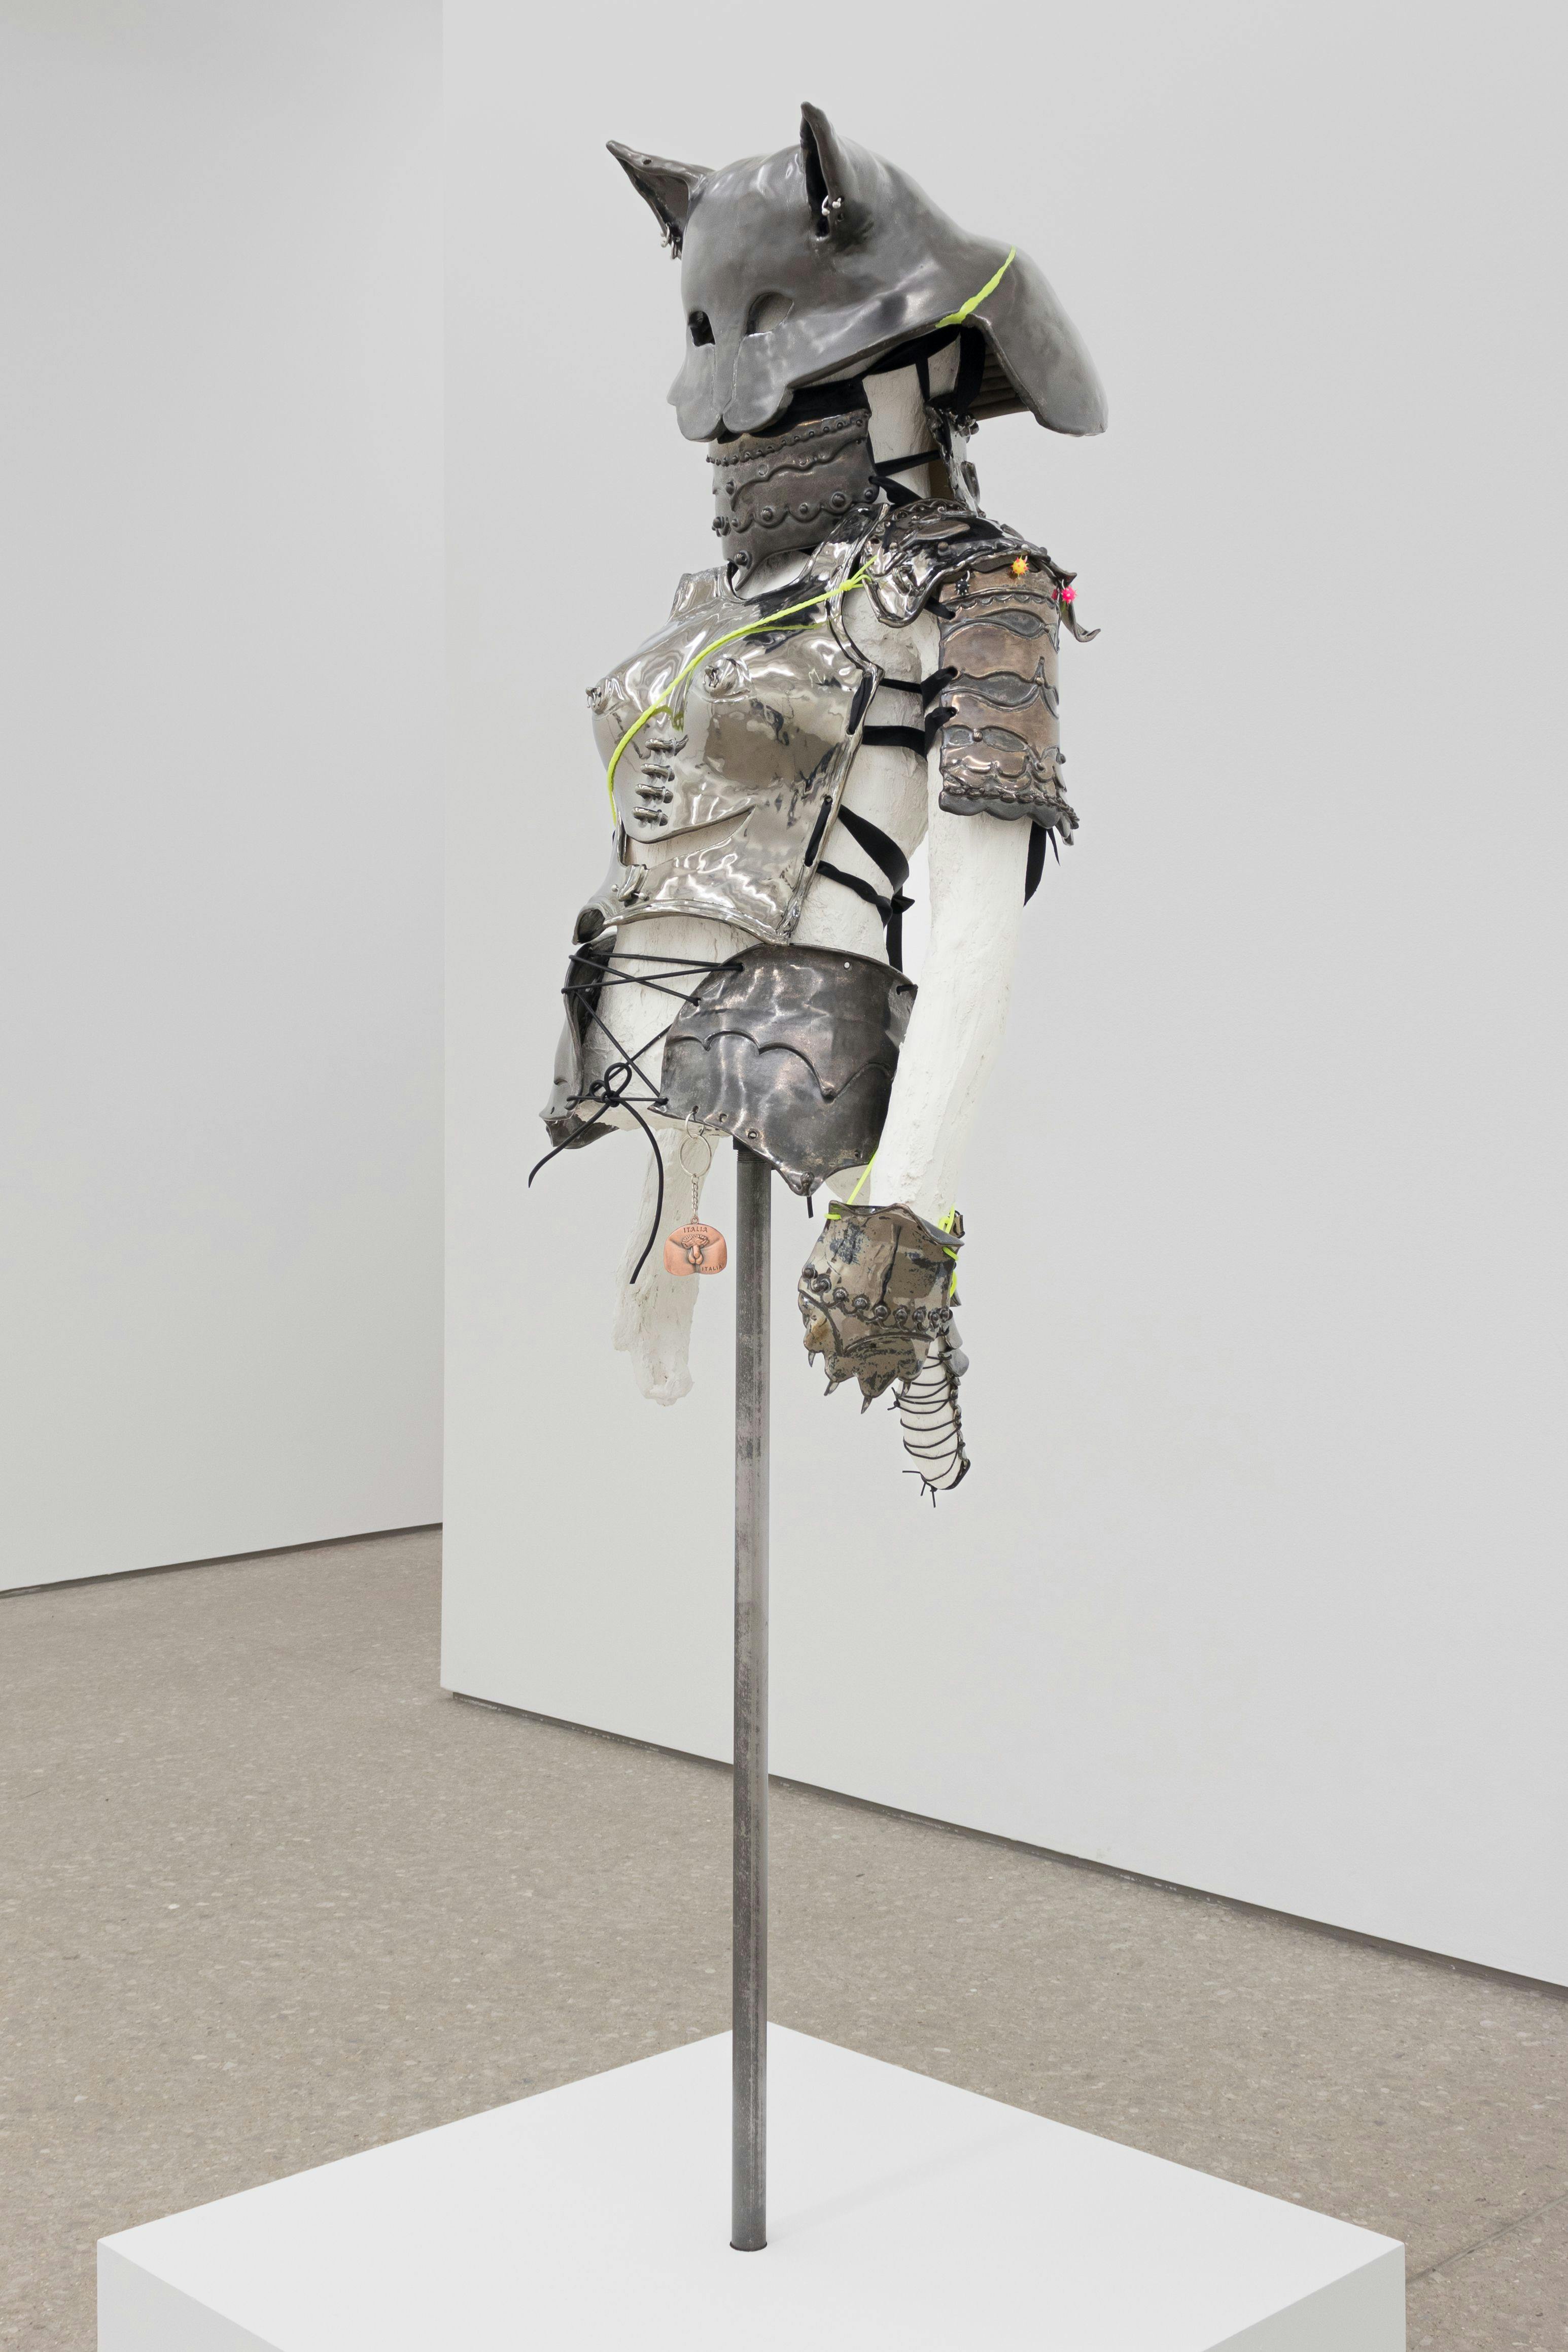 Catsuit 5, 2023

glazed stoneware, plaster, wire, satin ribbon, rubber cord, sterling and stainless steel jewelry

65h x 20w x 18d in